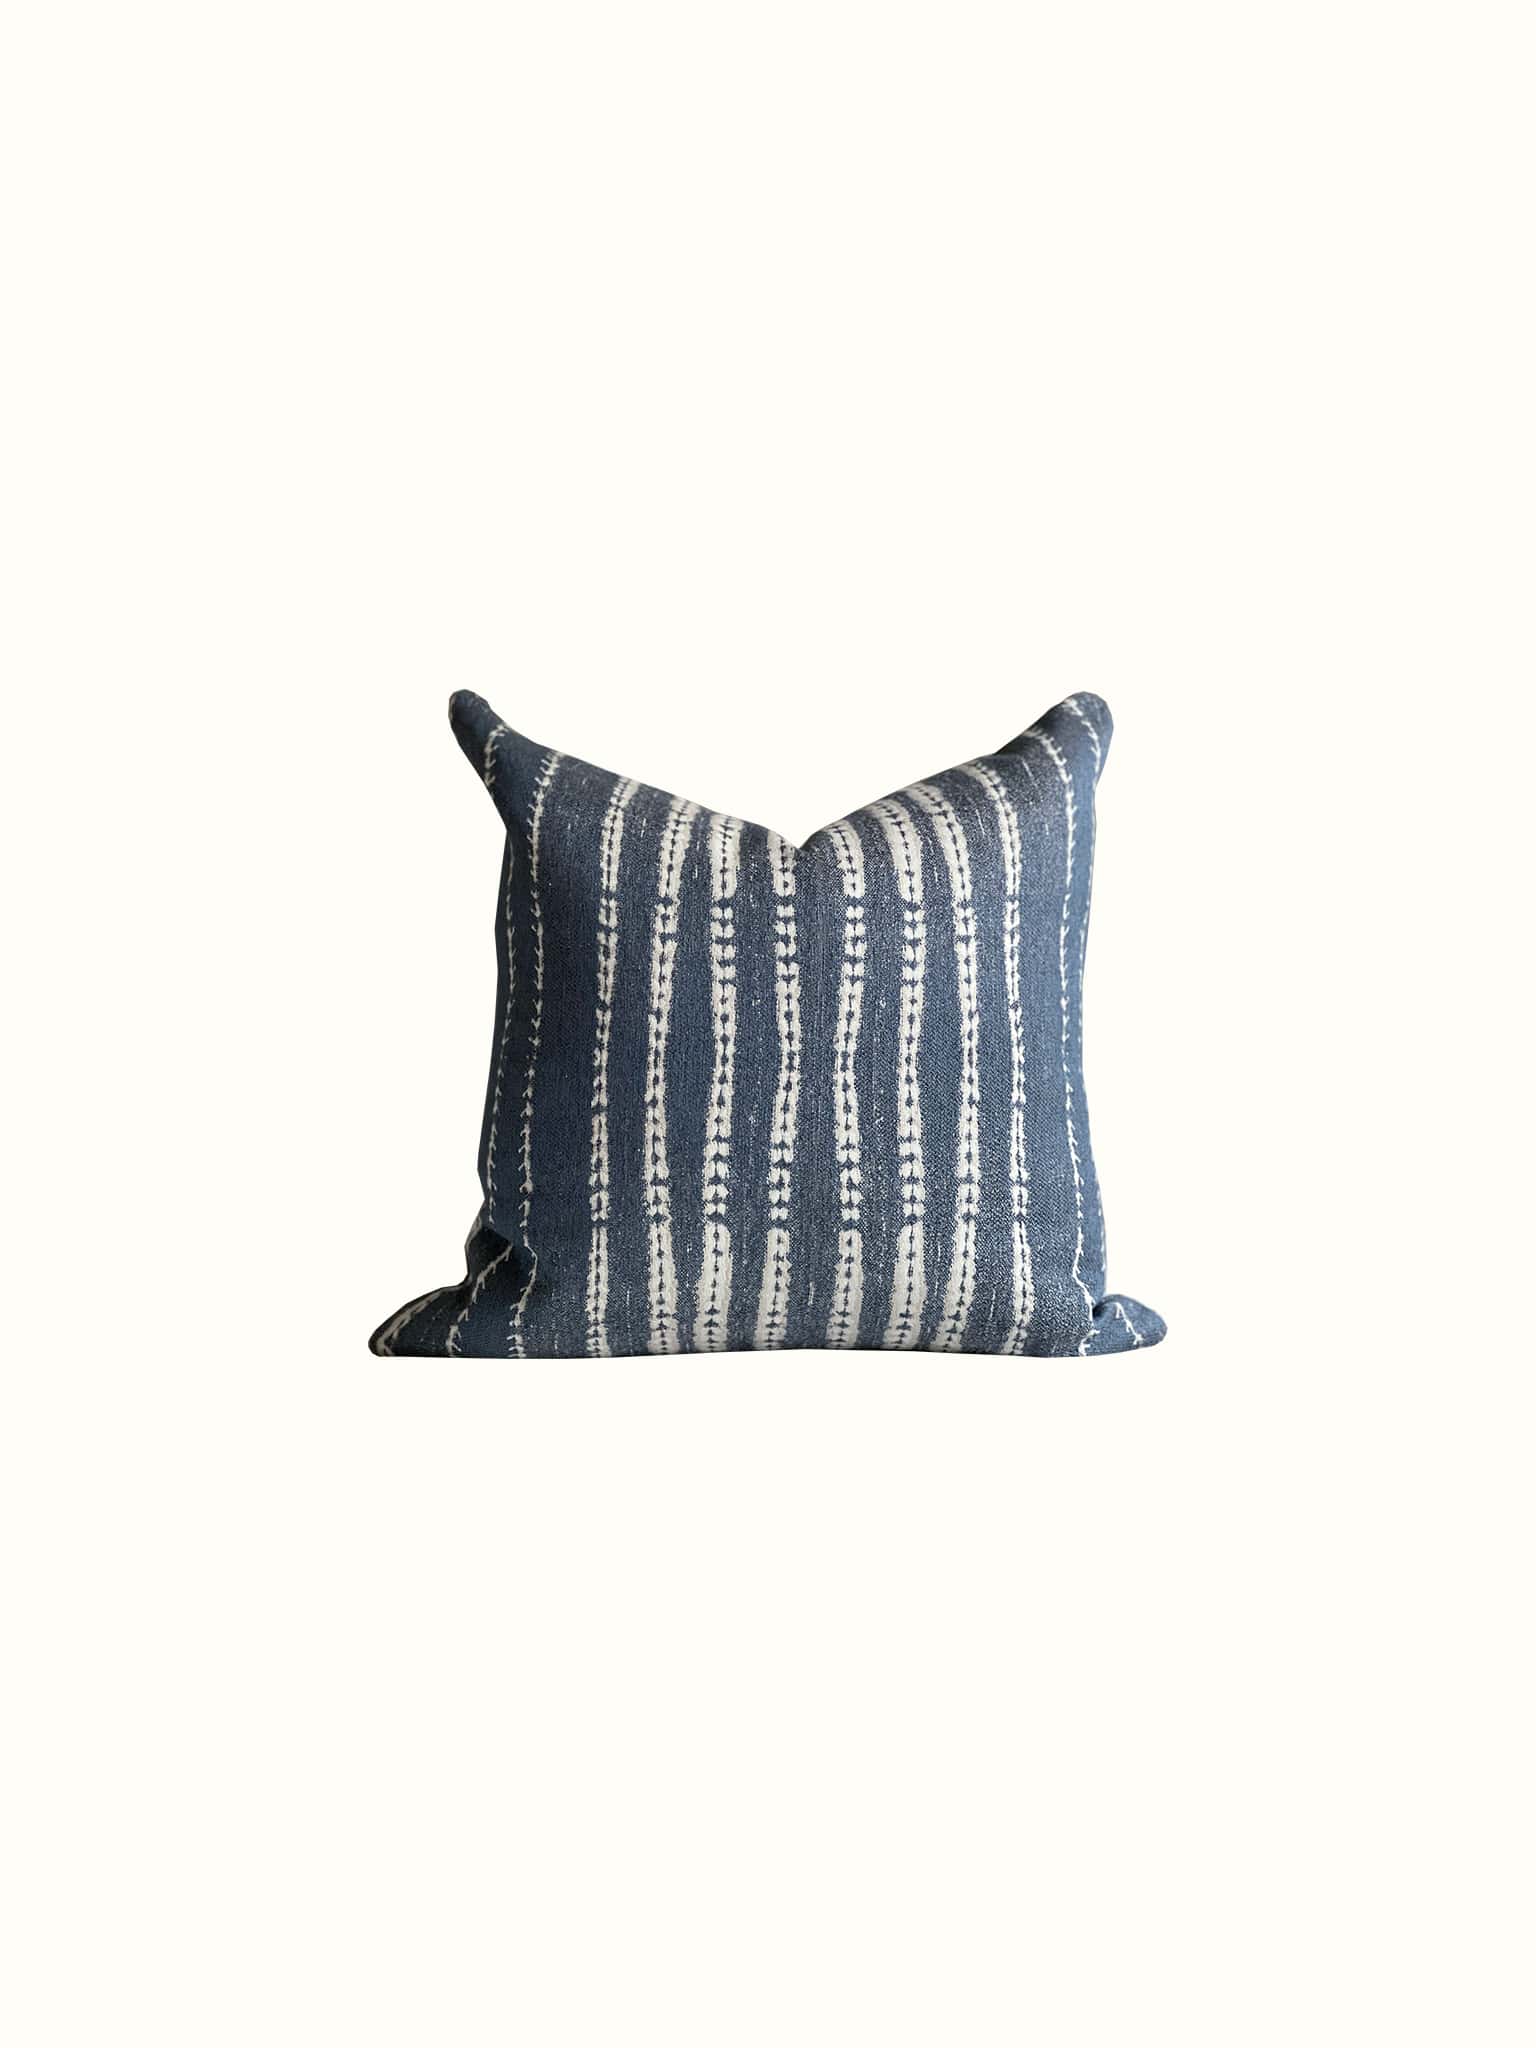 Classic white and blue striped throw pillow in unbalanced design adds a modern twist at Cielle Home